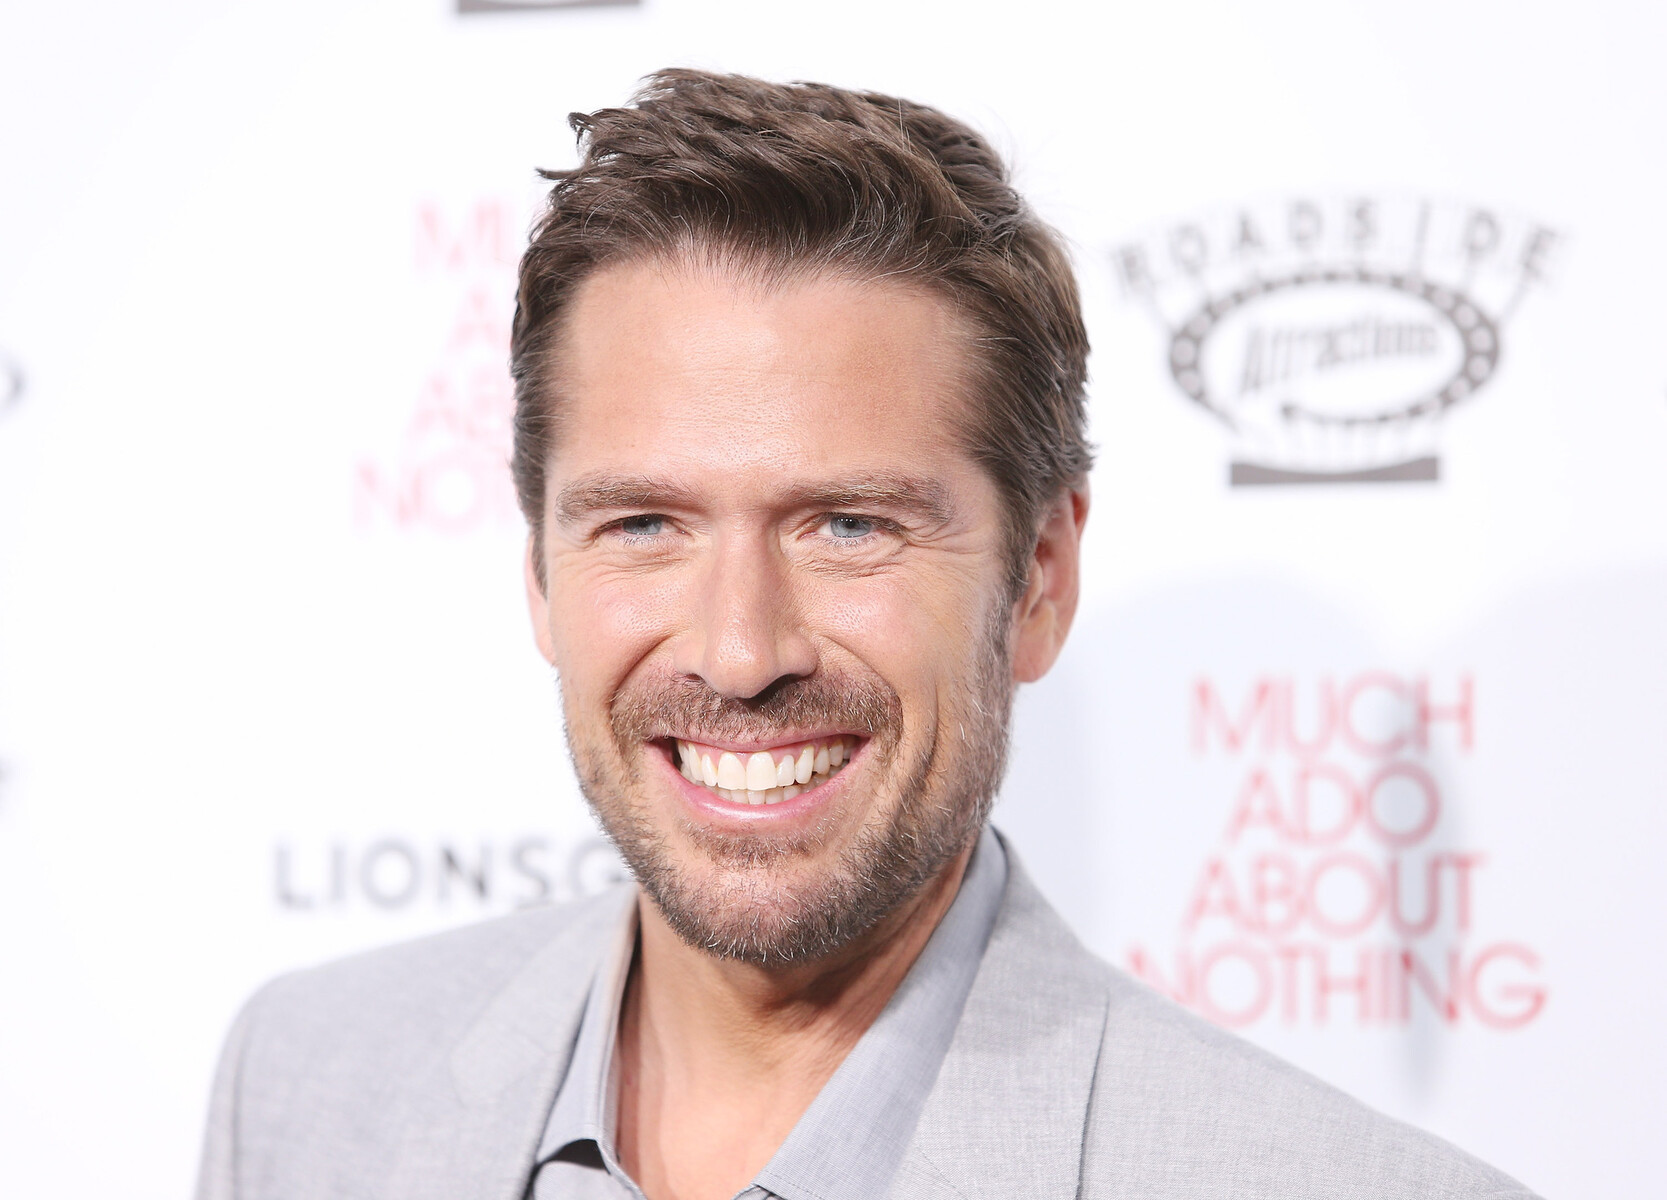 10-captivating-facts-about-alexis-denisof